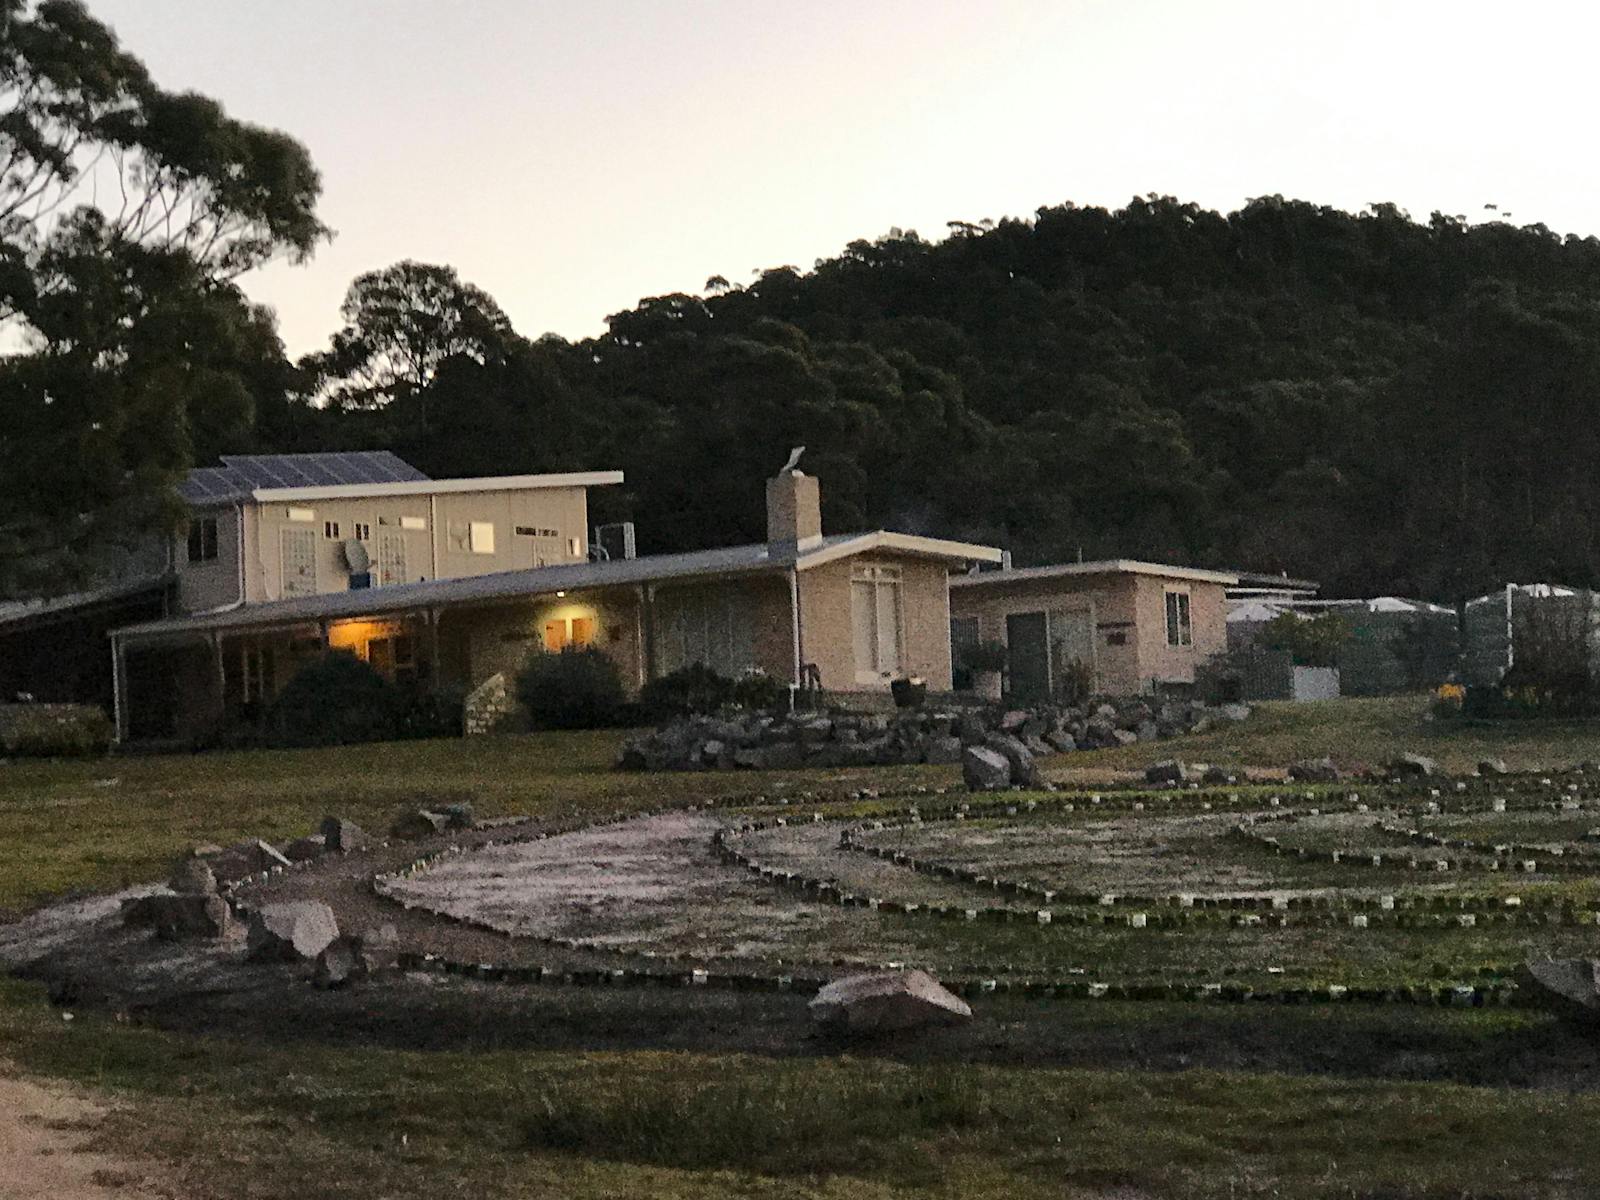 Our lovely accommodation at Badgers Corner Flinders Island